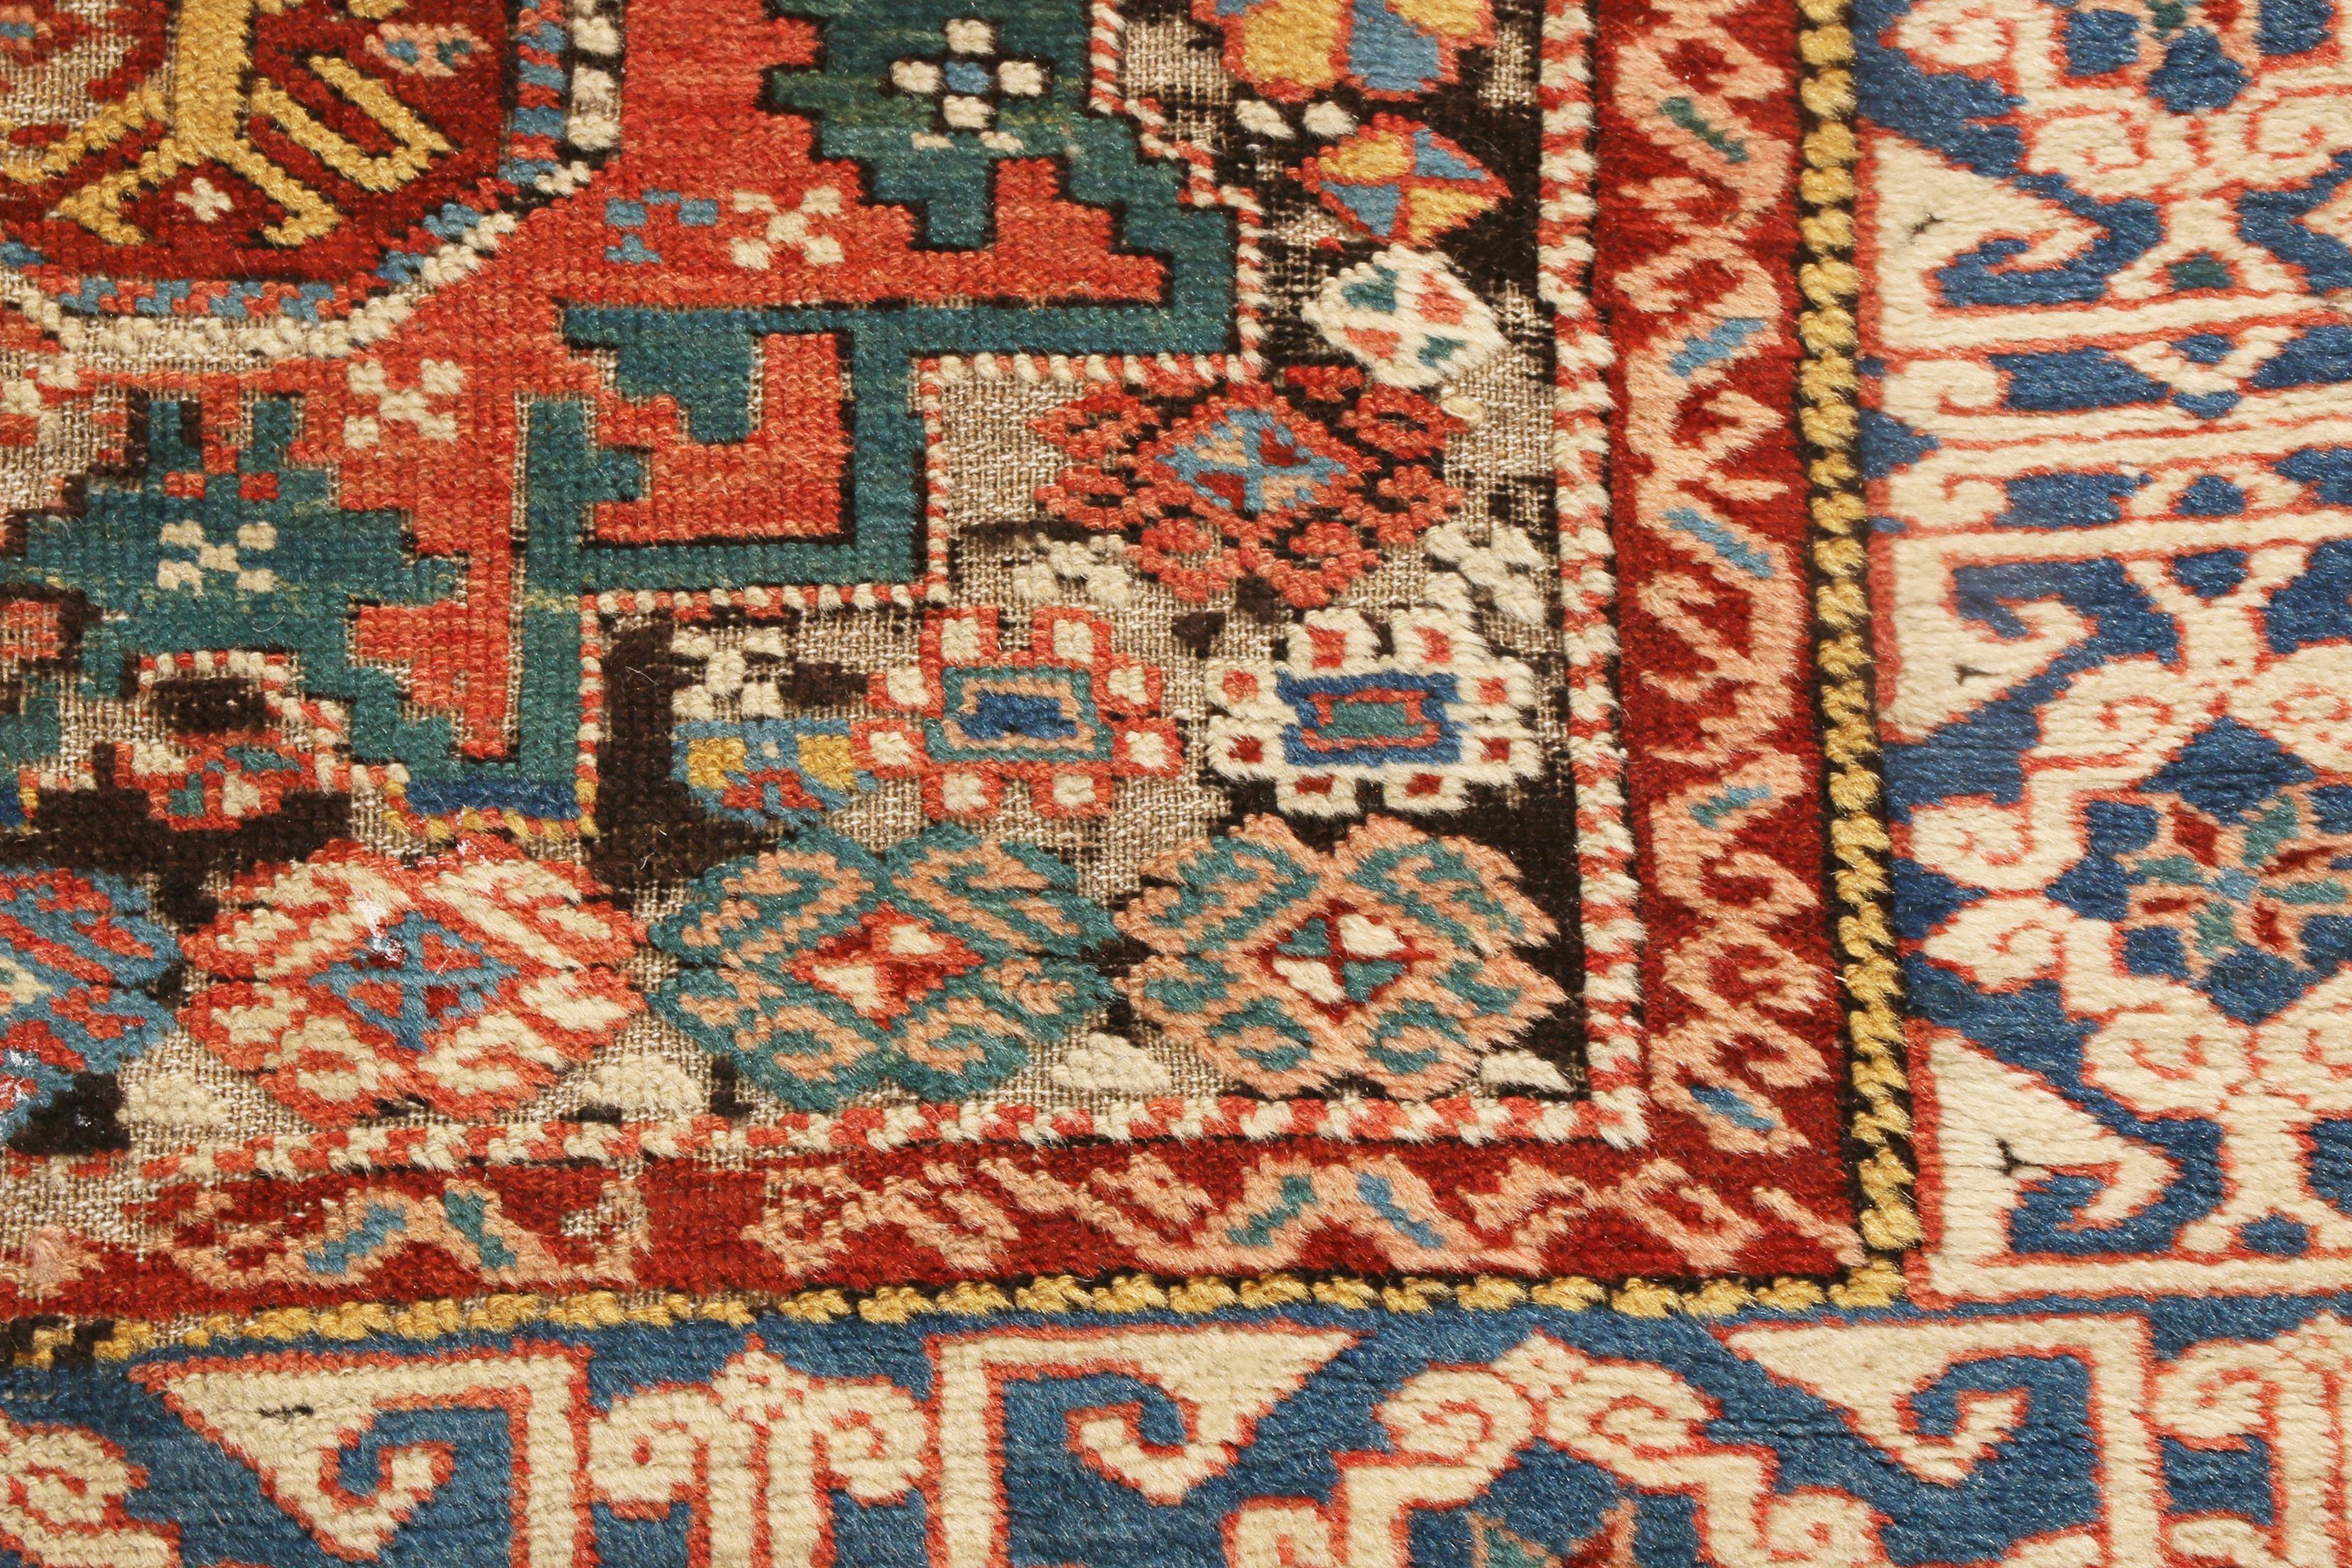 Antique Lori Geometric Red and Beige Wool Runner by Rug & Kilim In Good Condition For Sale In Long Island City, NY